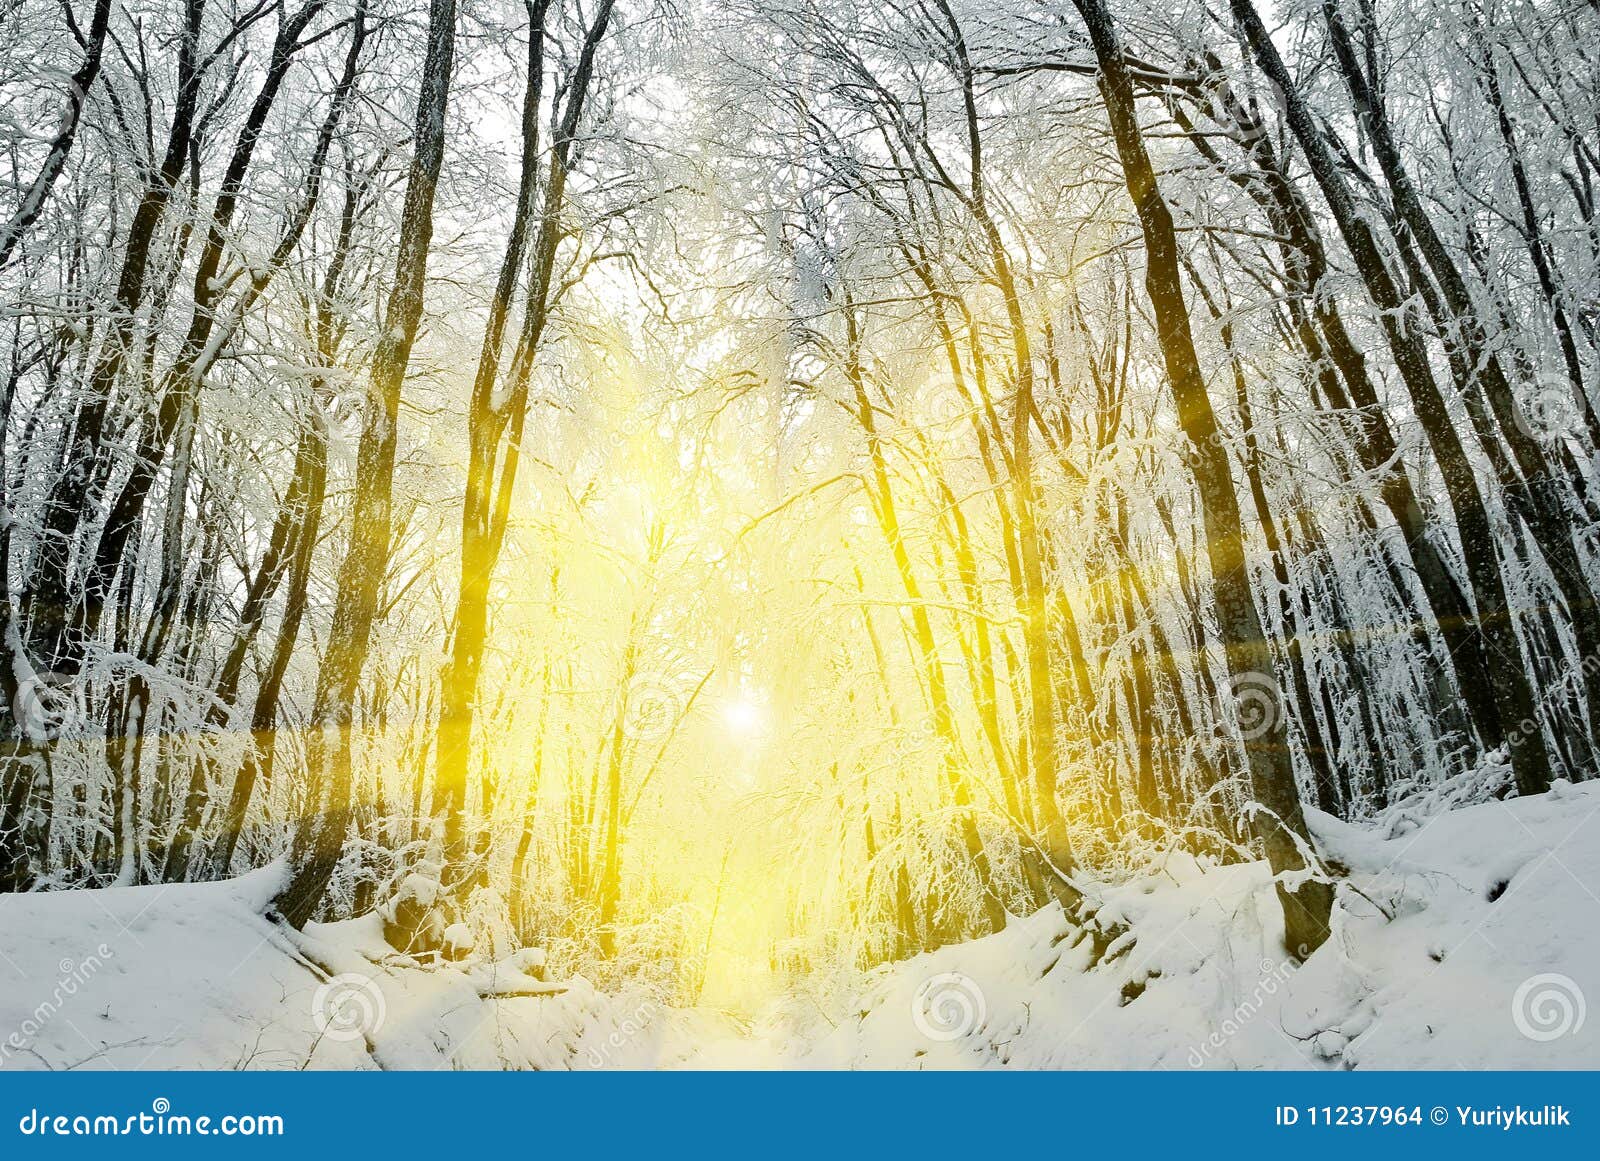 Winter forest stock photo. Image of panoramic, sunlight - 11237964